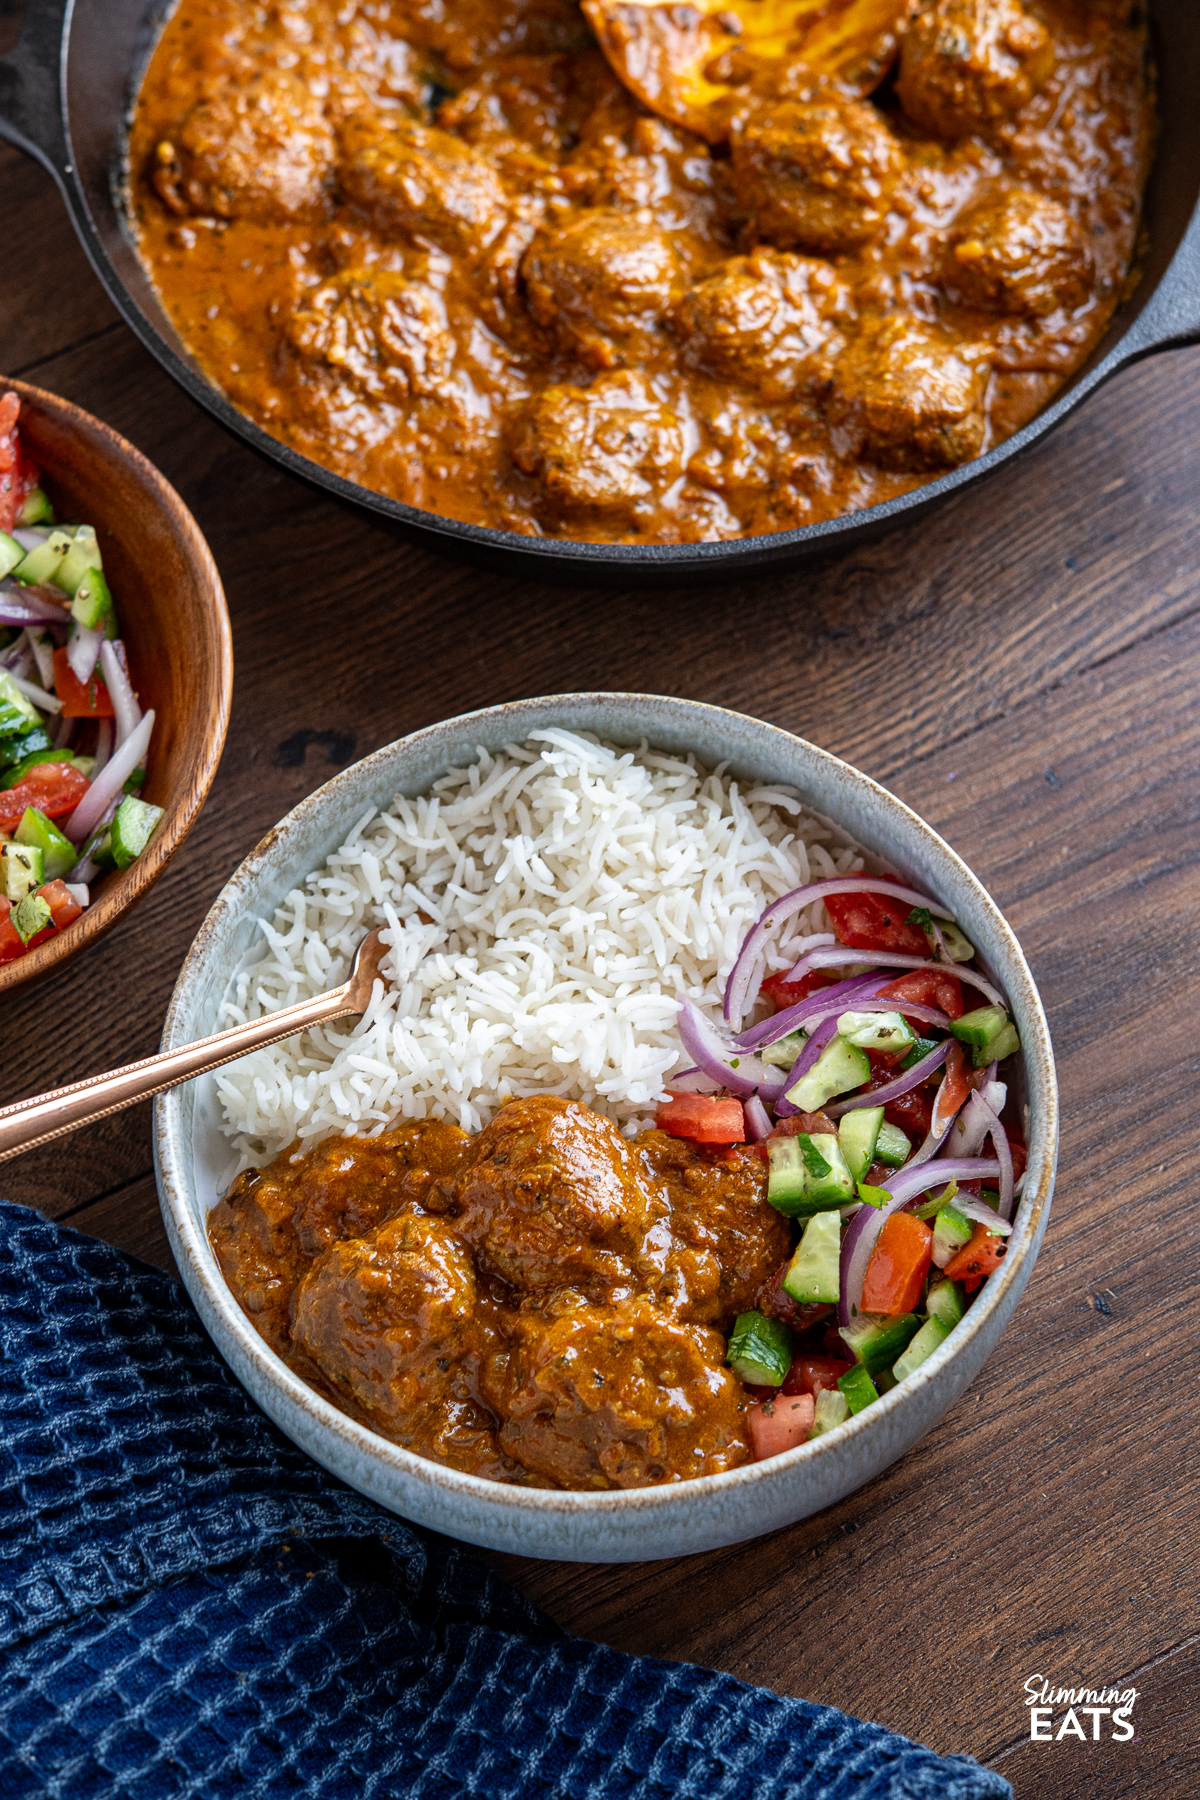 
A pale blue bowl filled with lamb kofta curry and rice, accompanied by a fork, with a skillet of additional kofta and a bowl of colorful Indian salad in the background.